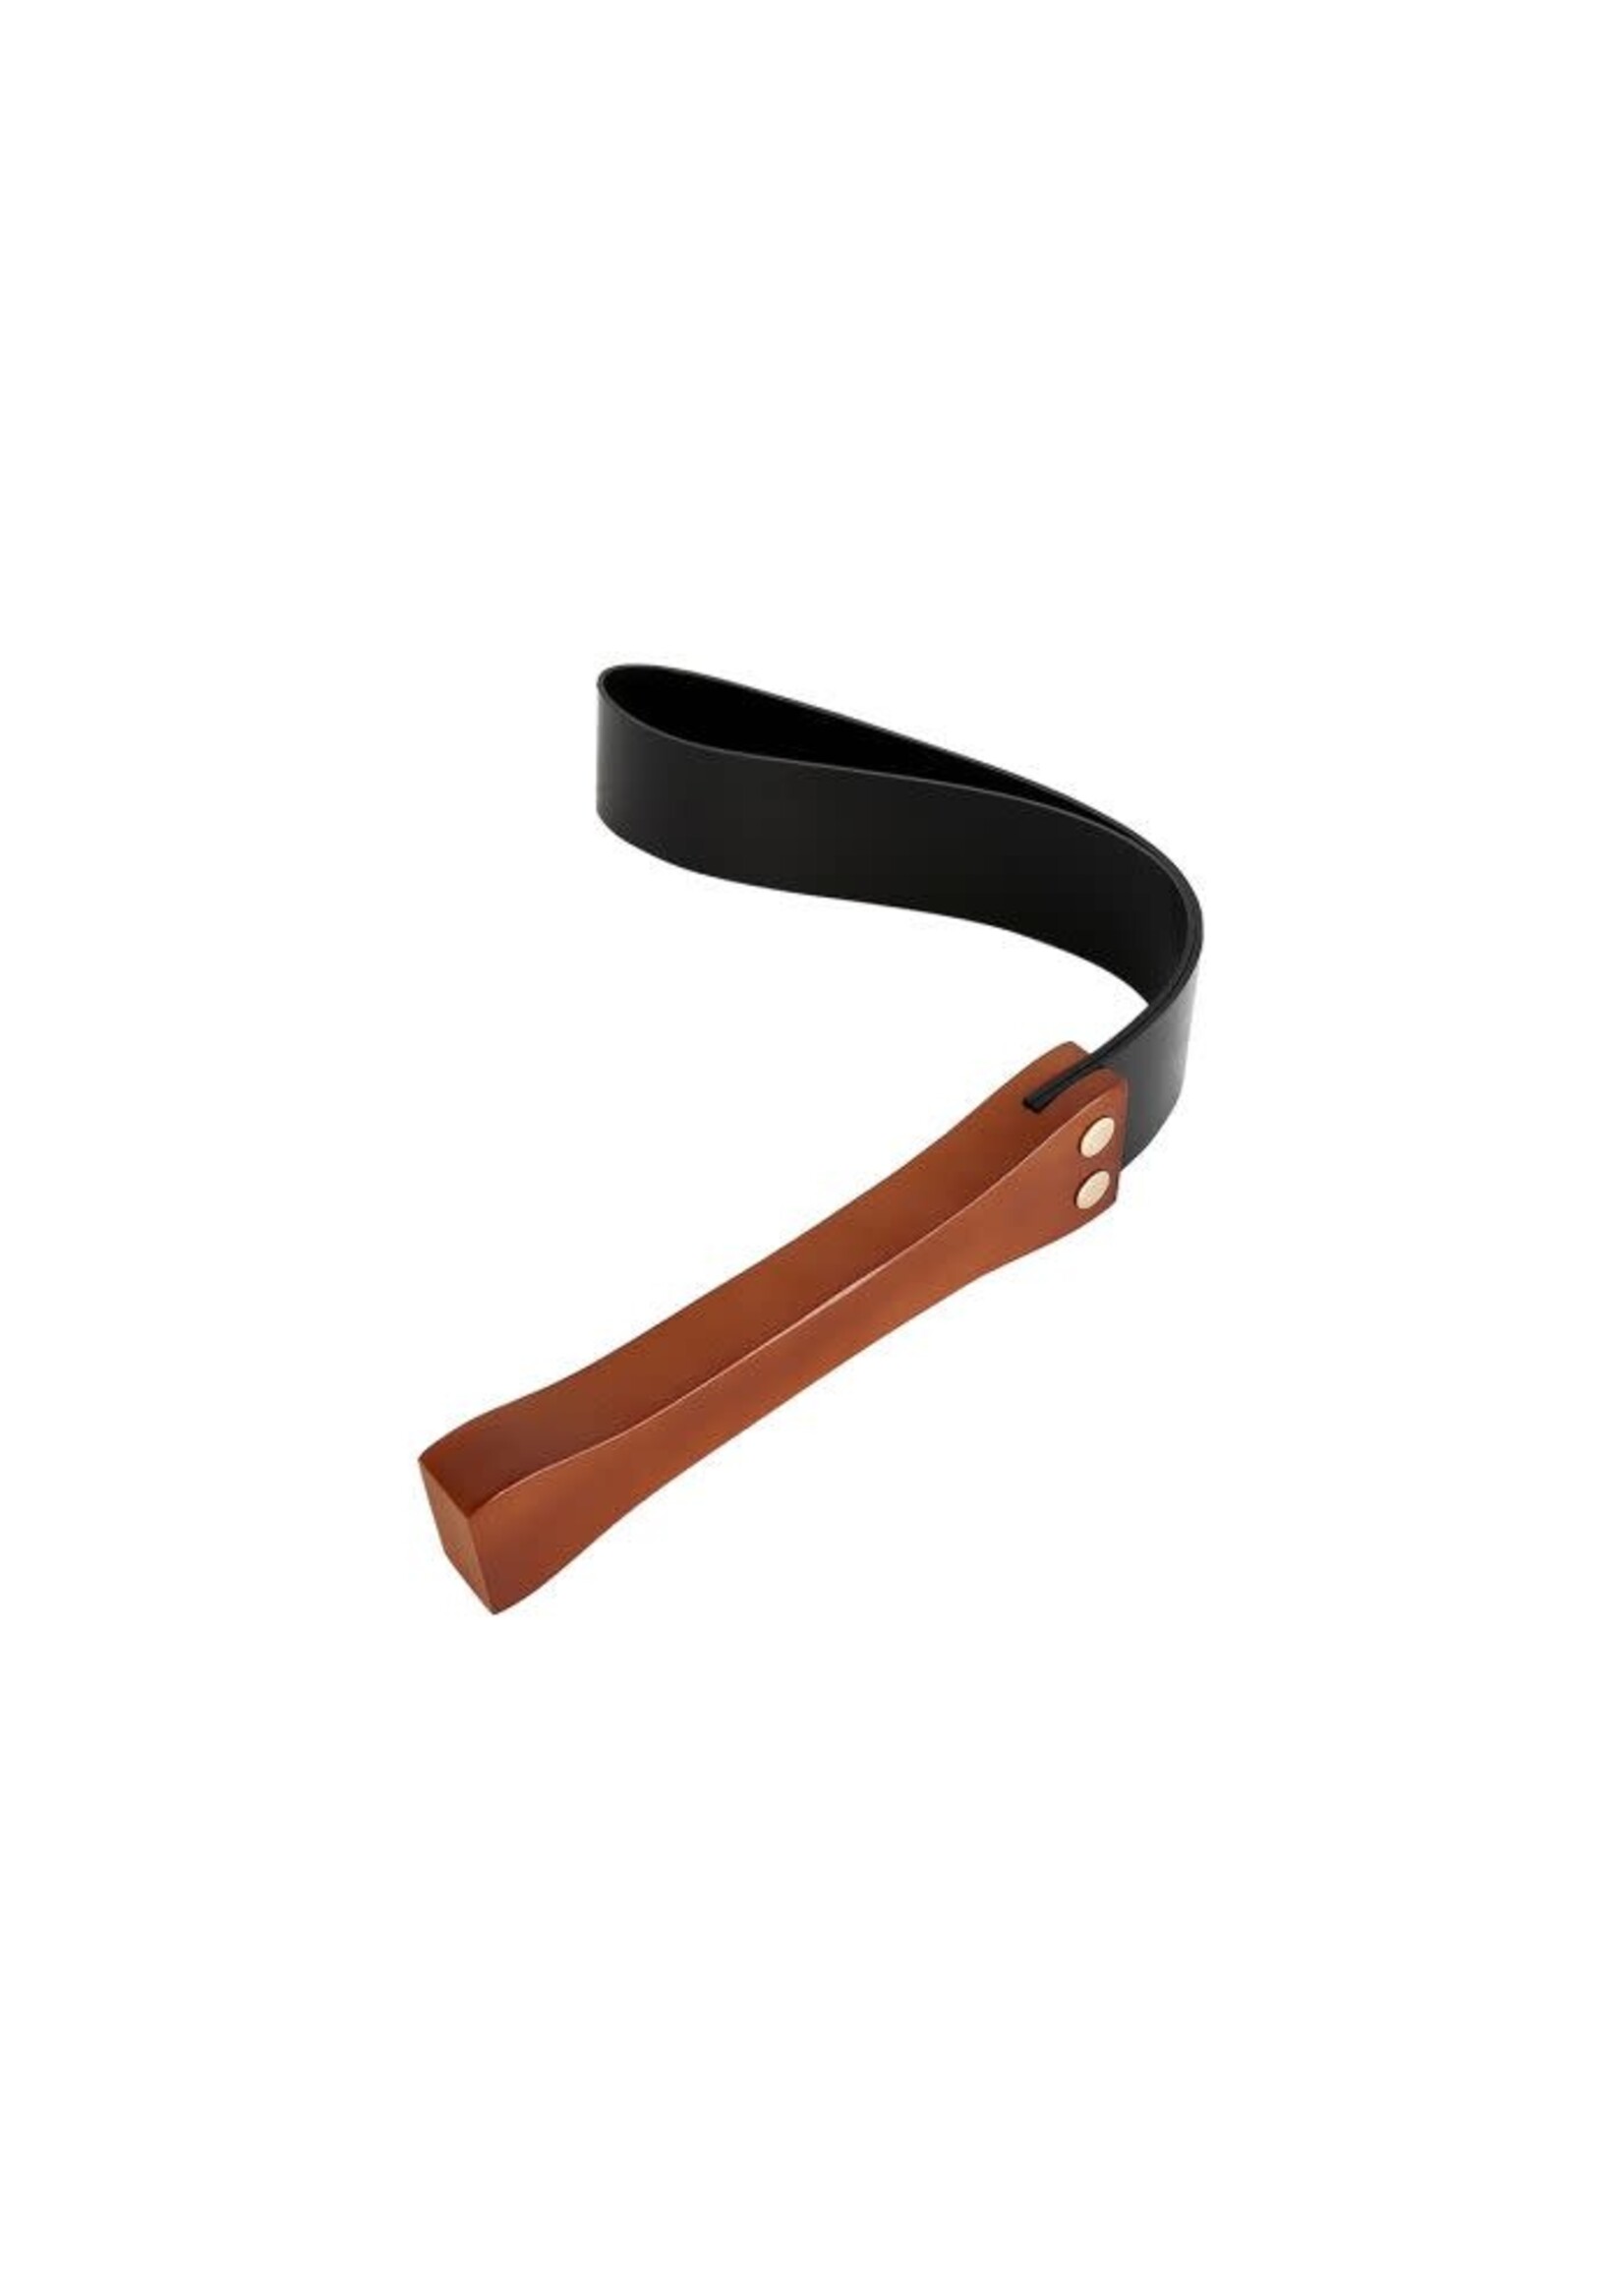 O-Products Paddle with wooden handle